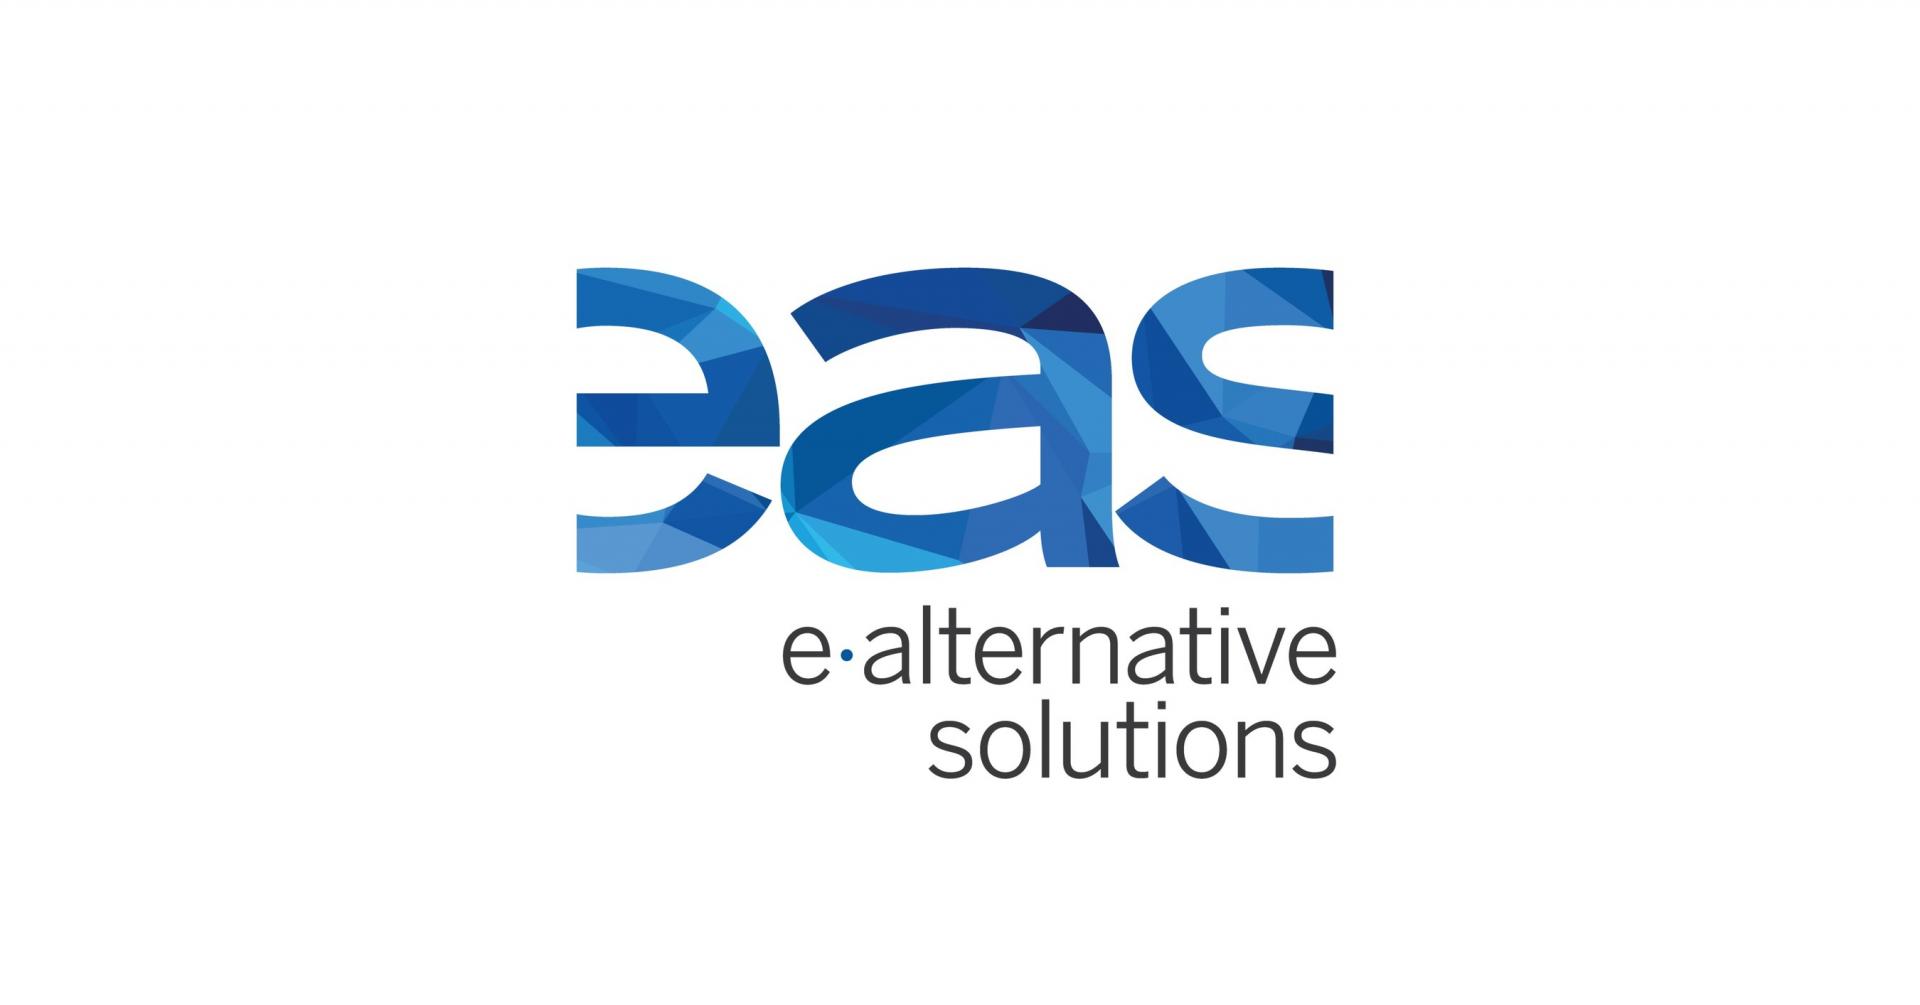 Photo for: E-Alternative Solutions Introduces Forth™ Cannabidiol (CBD) at National Association of Convenience Stores Conference 2019